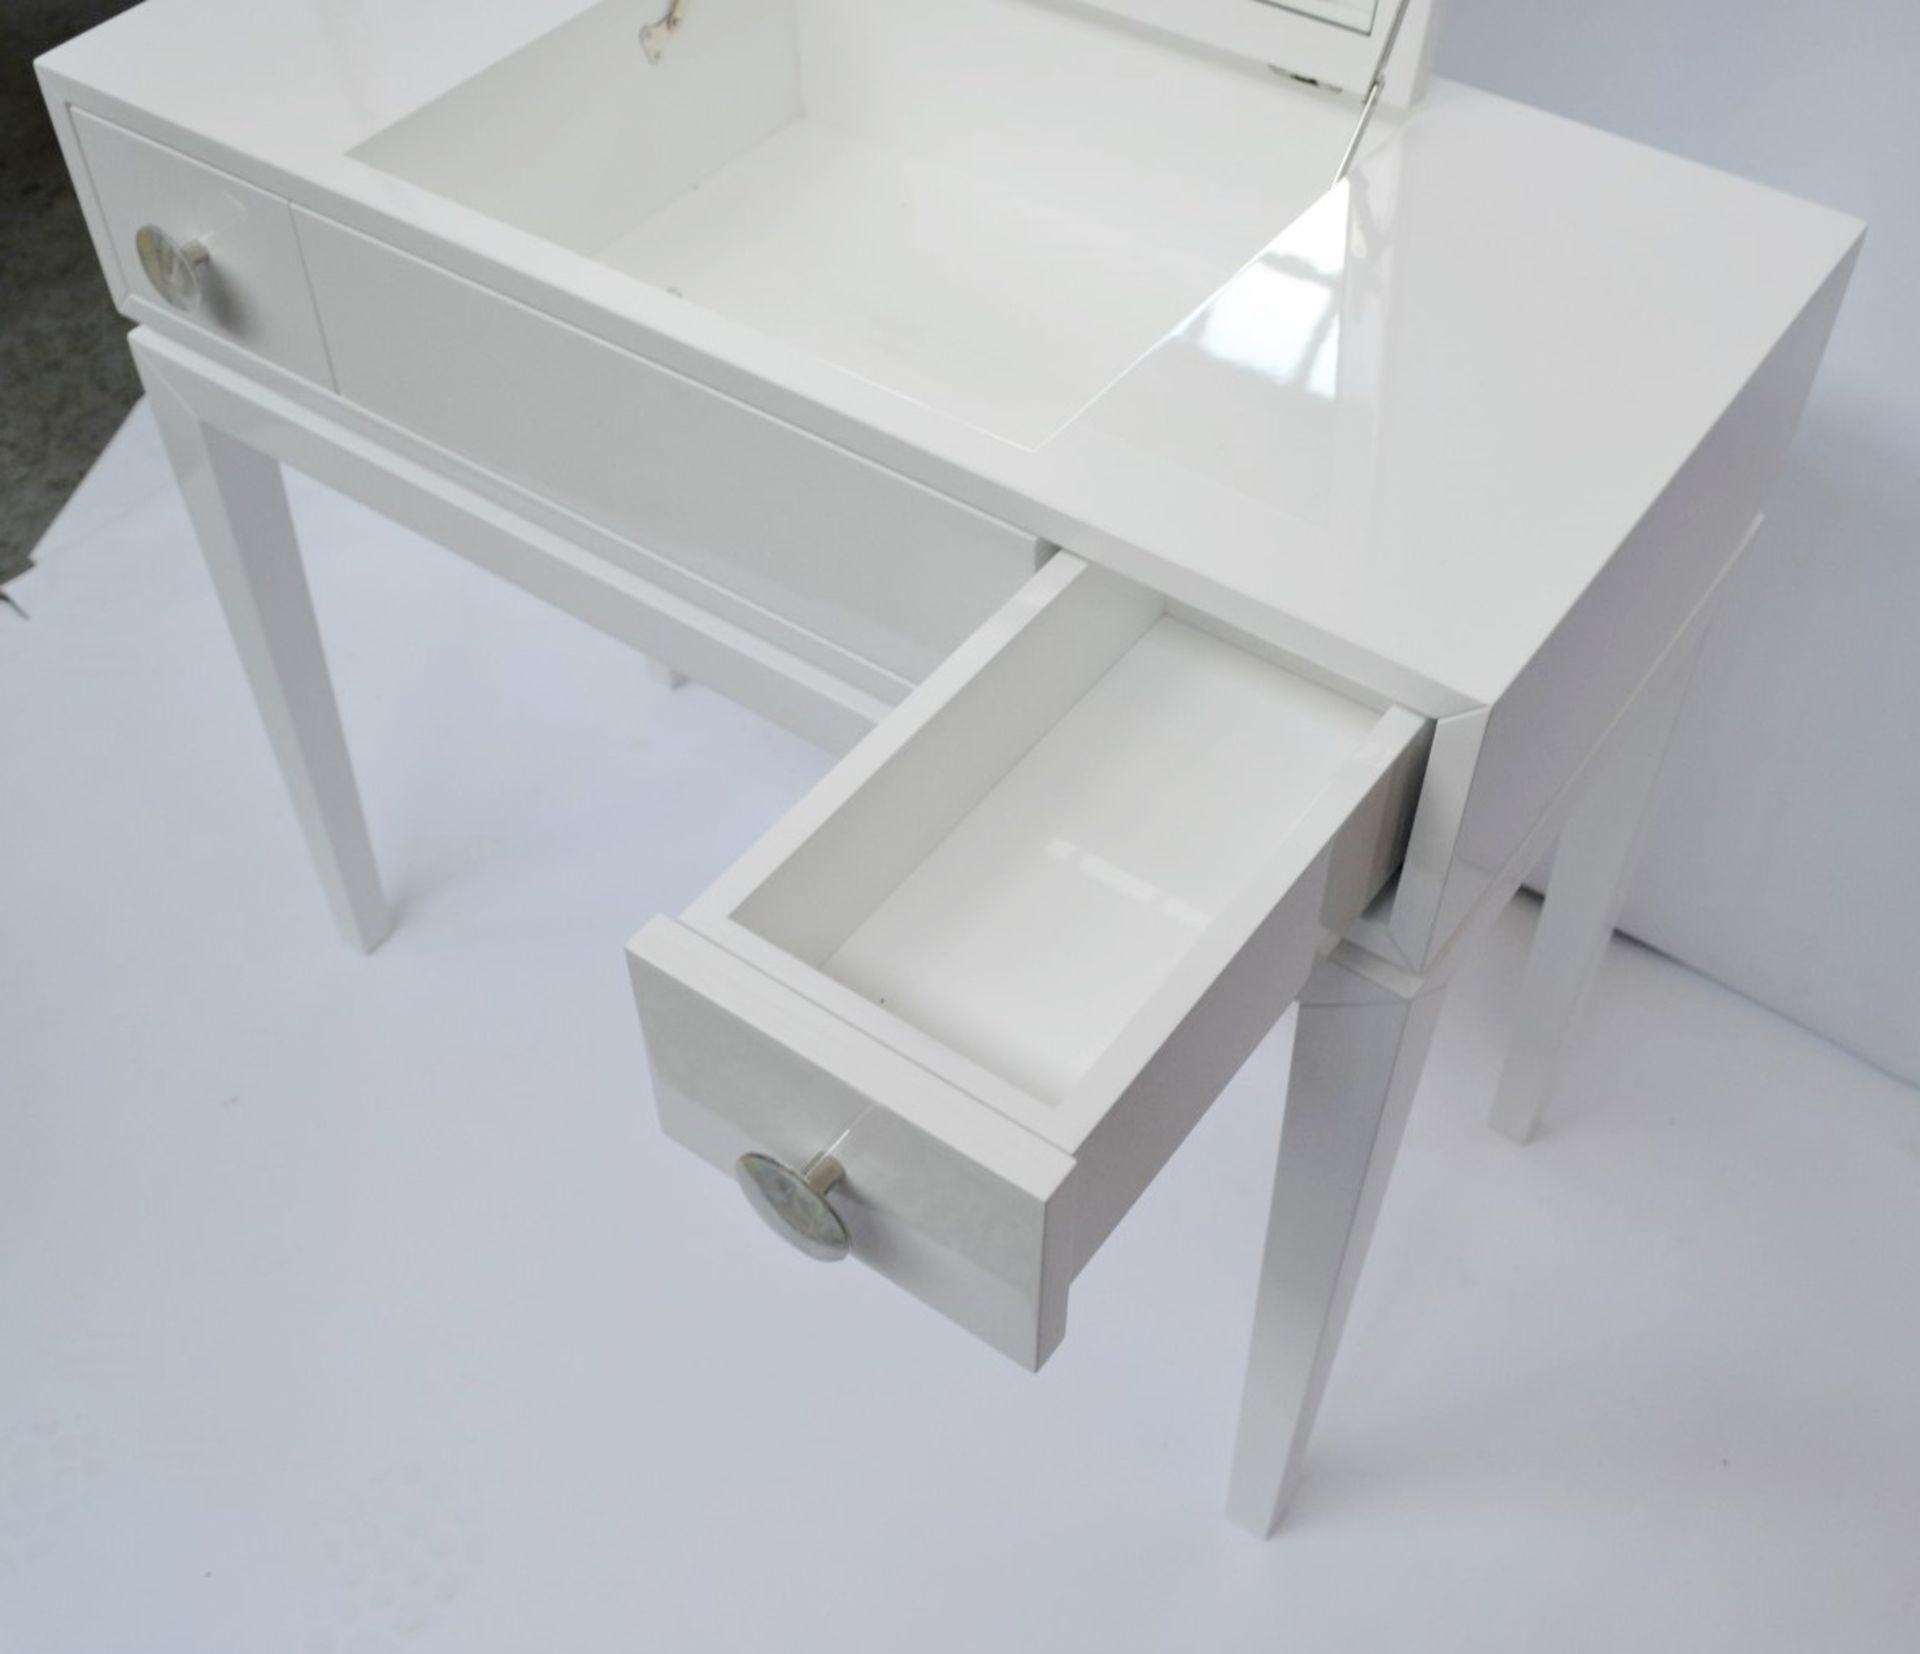 1 x FRATO Chicago Dressing Console - White Lacquered - Dimensions: H75 x W85 x D40cm - Ref: - Image 2 of 6